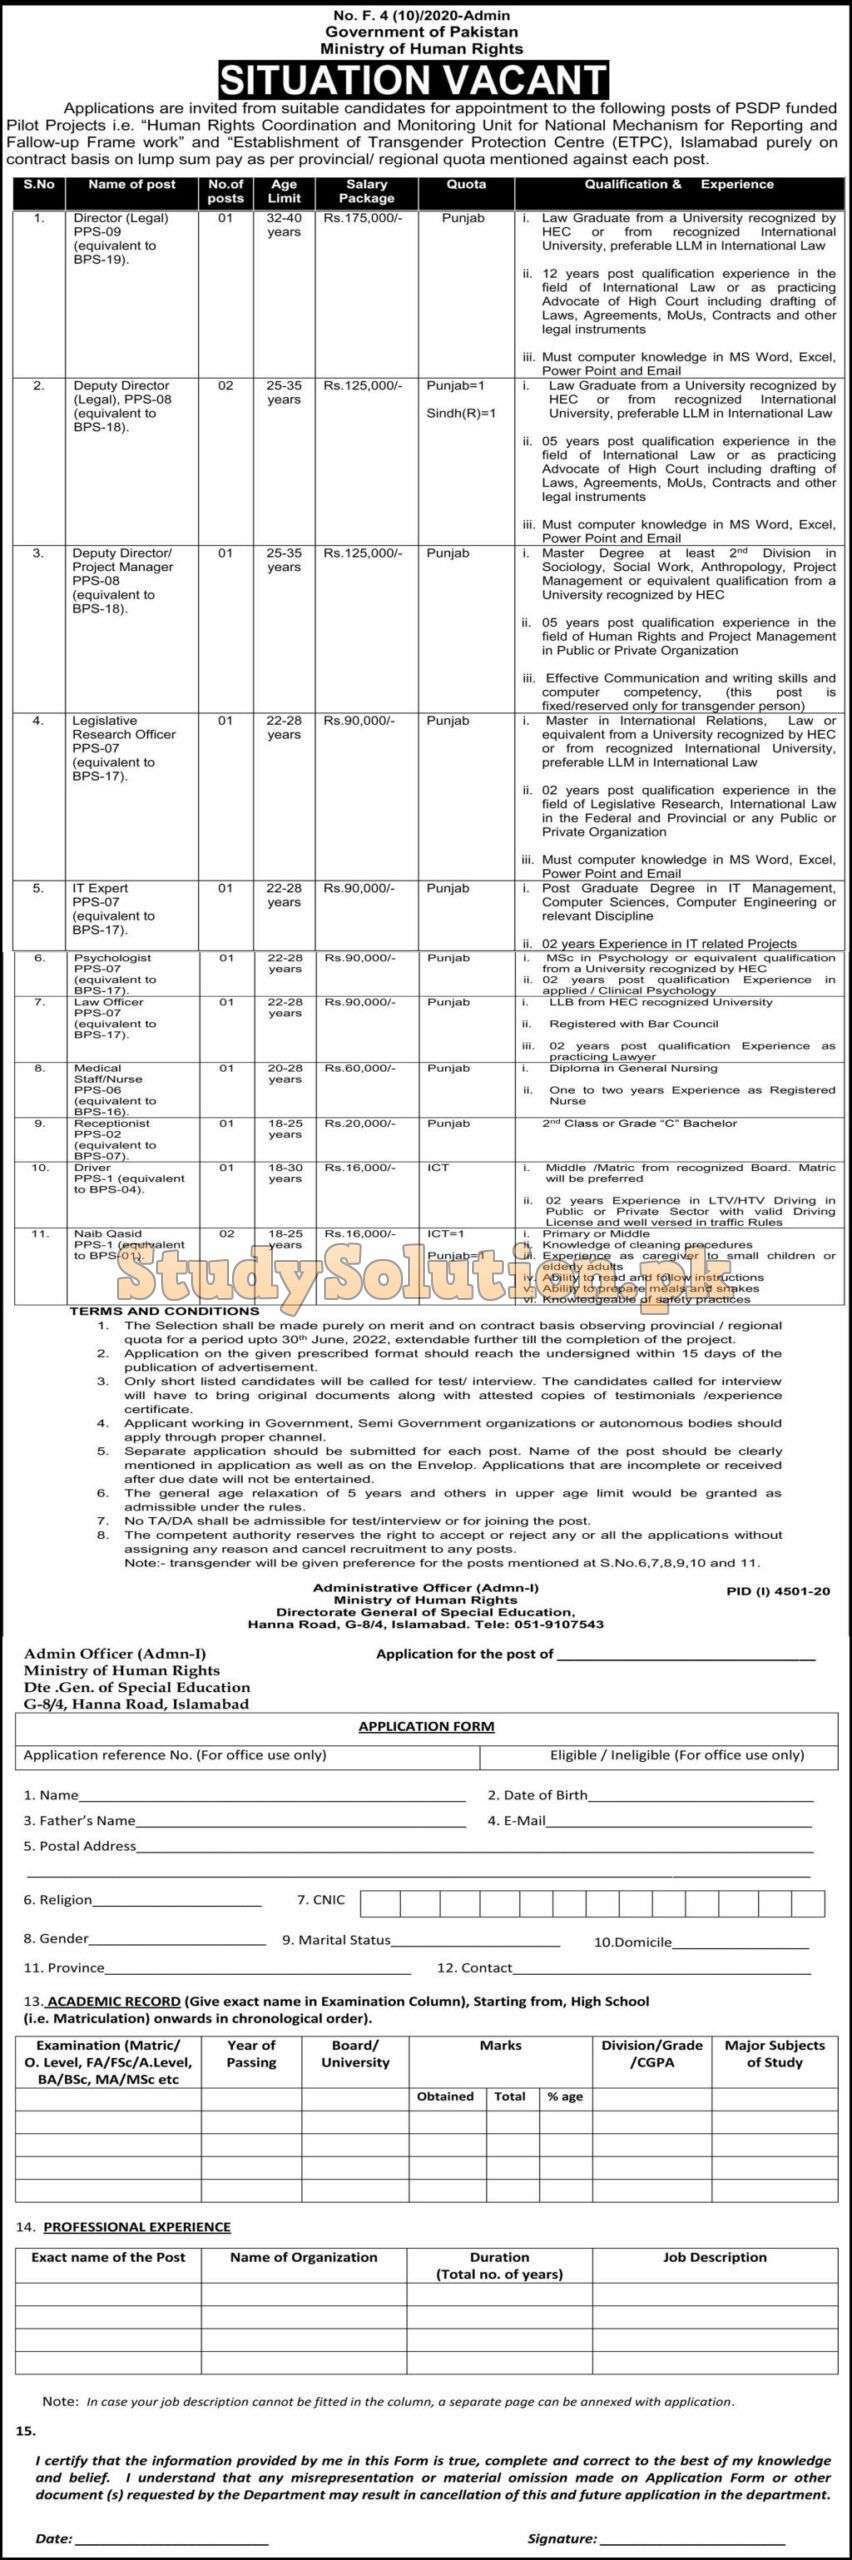 Ministry of Human Rights Latest Jobs February 2021